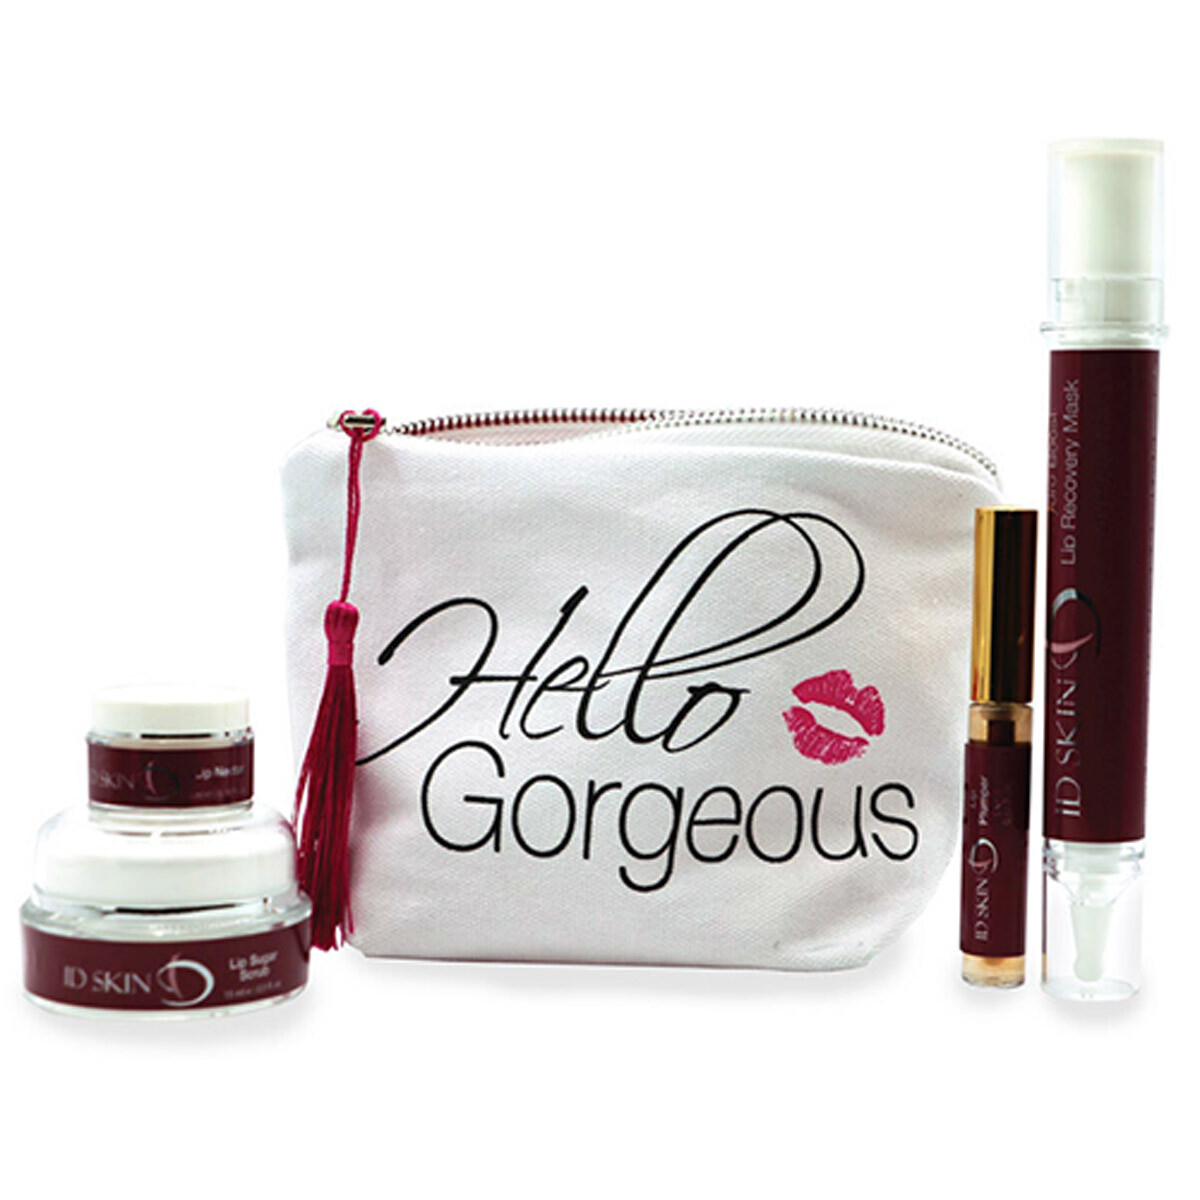 Lip Care Kit Professional skincare products for estheticians